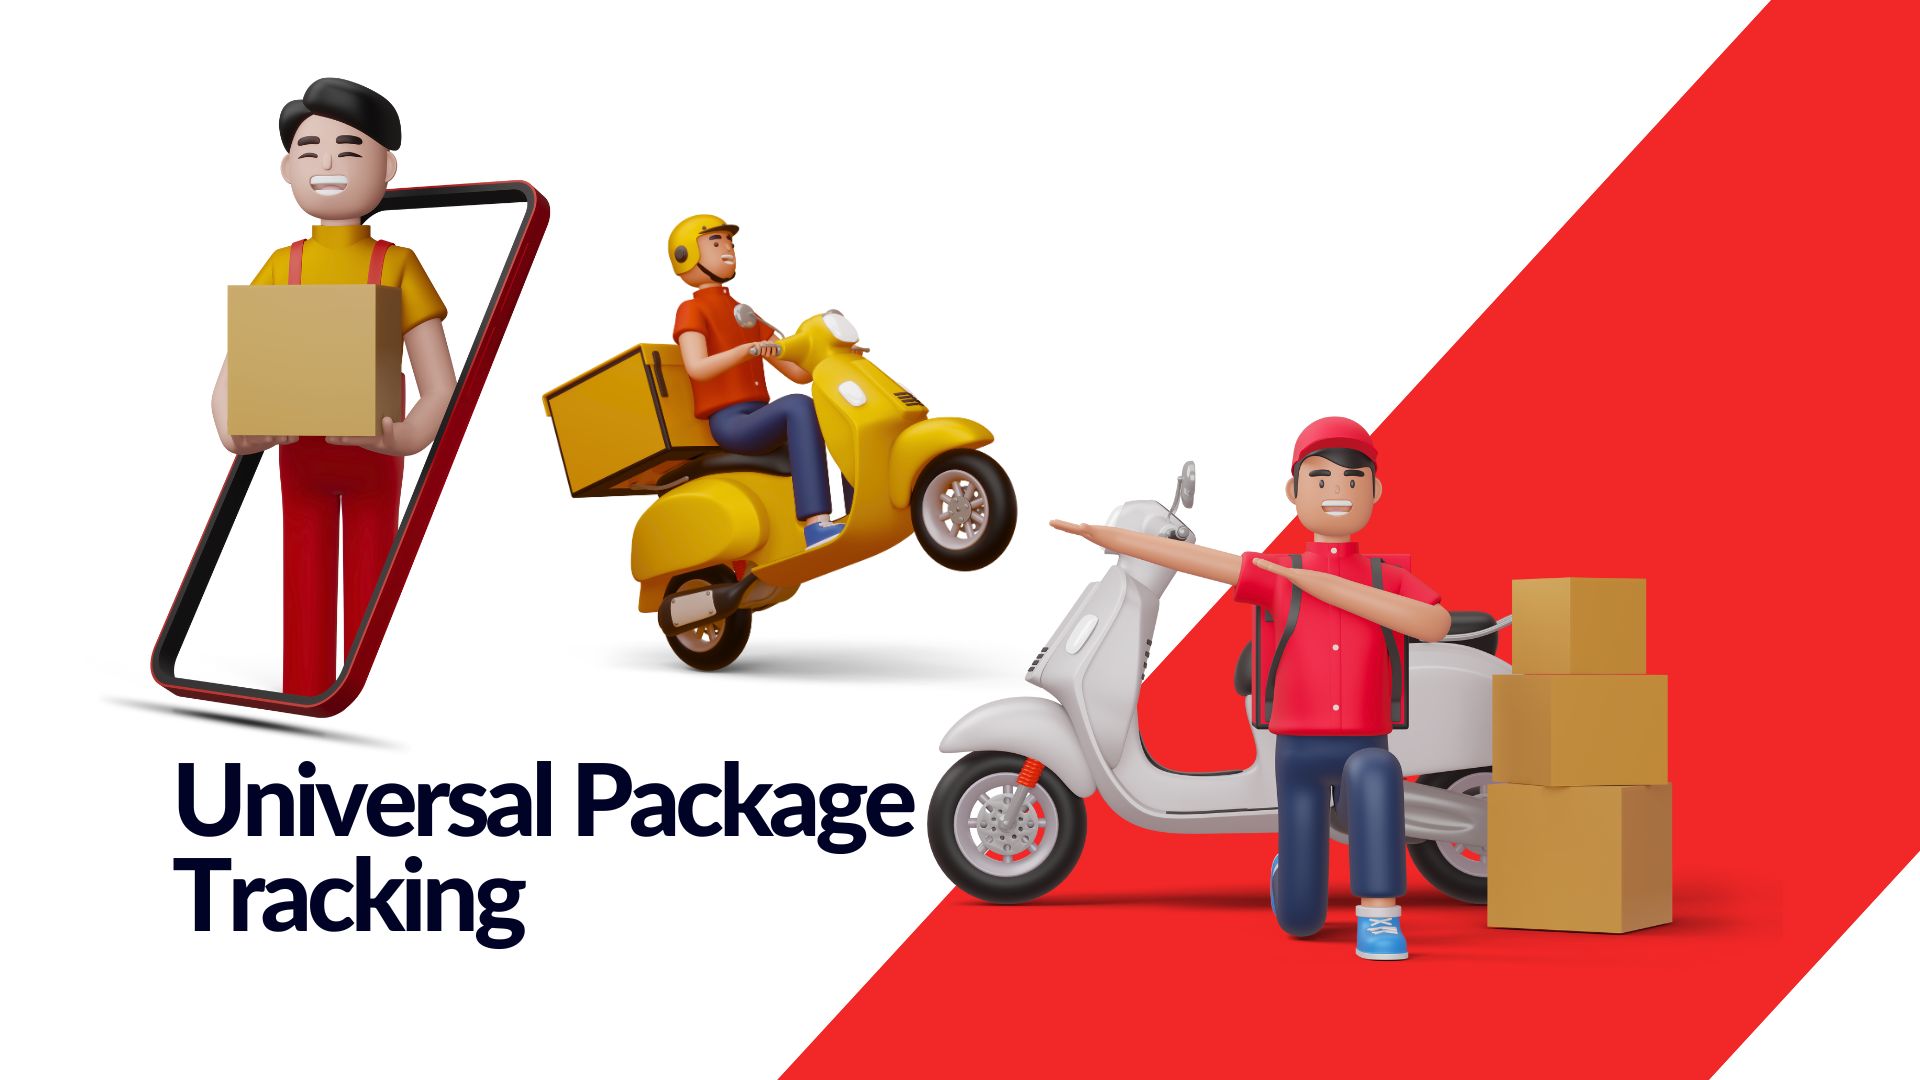 Universal Package Tracking: Simplifying Your Shipping Experience